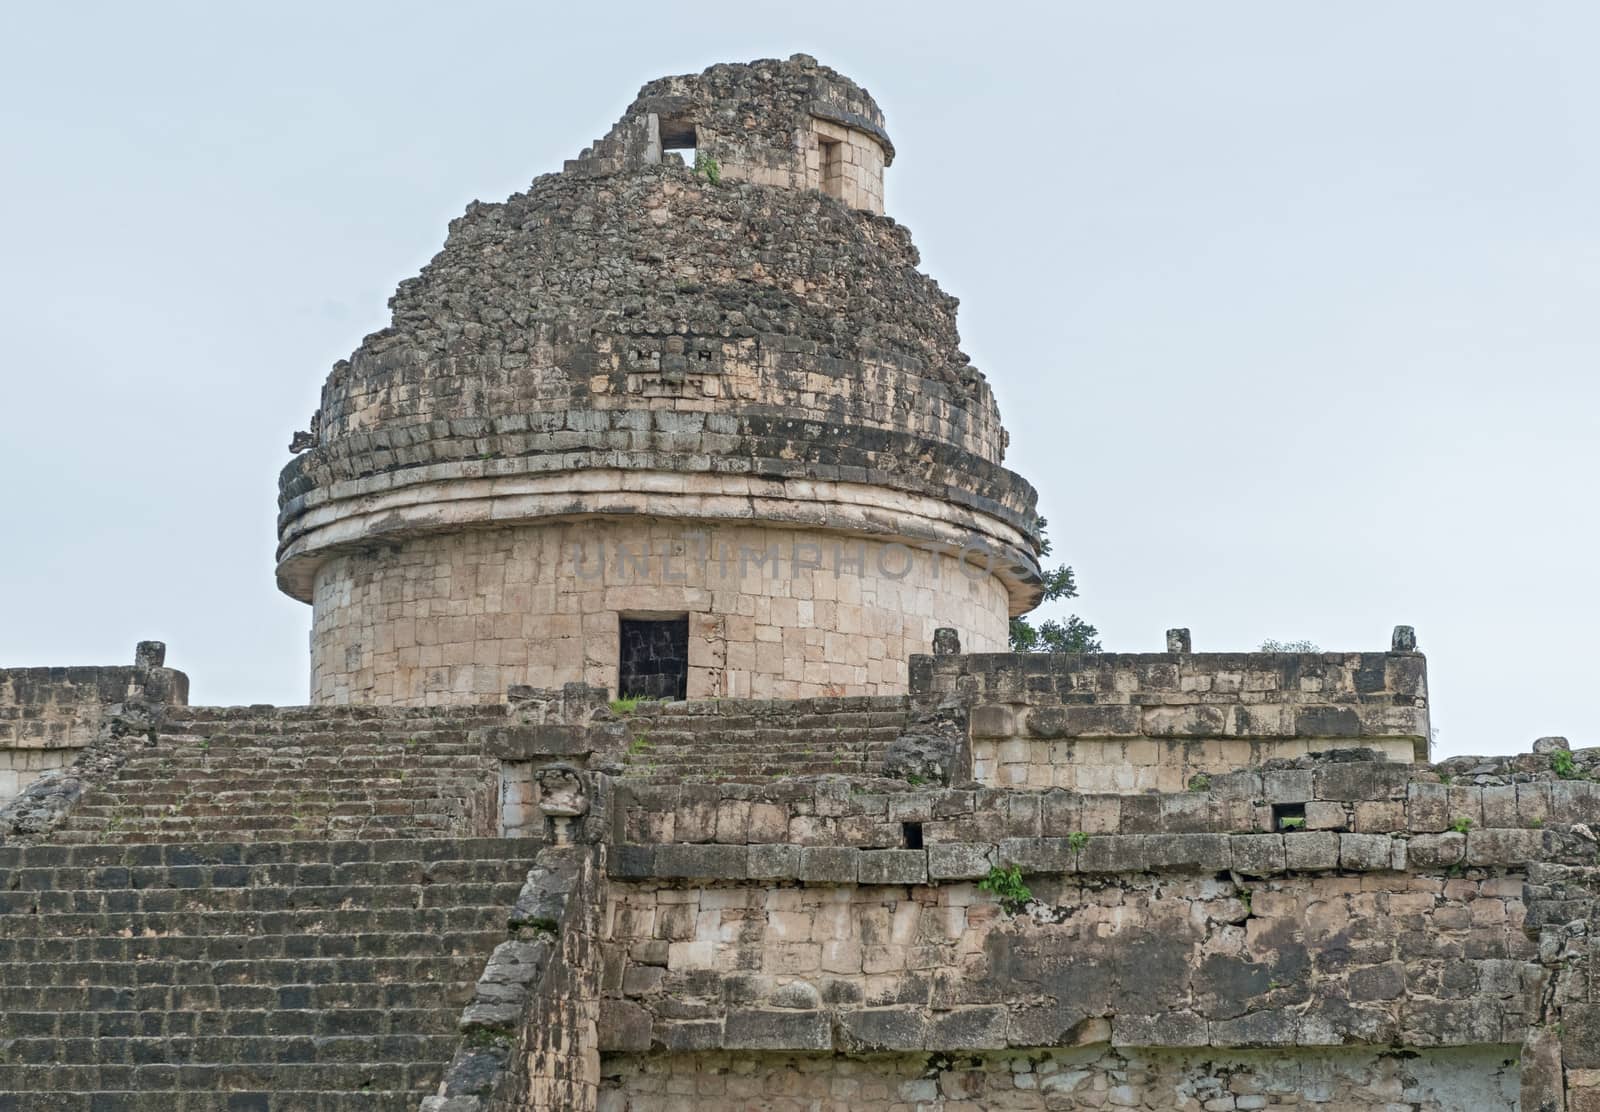 An ancient observatory  in Chichen Itza Mayan city, Mexico  by Marcus